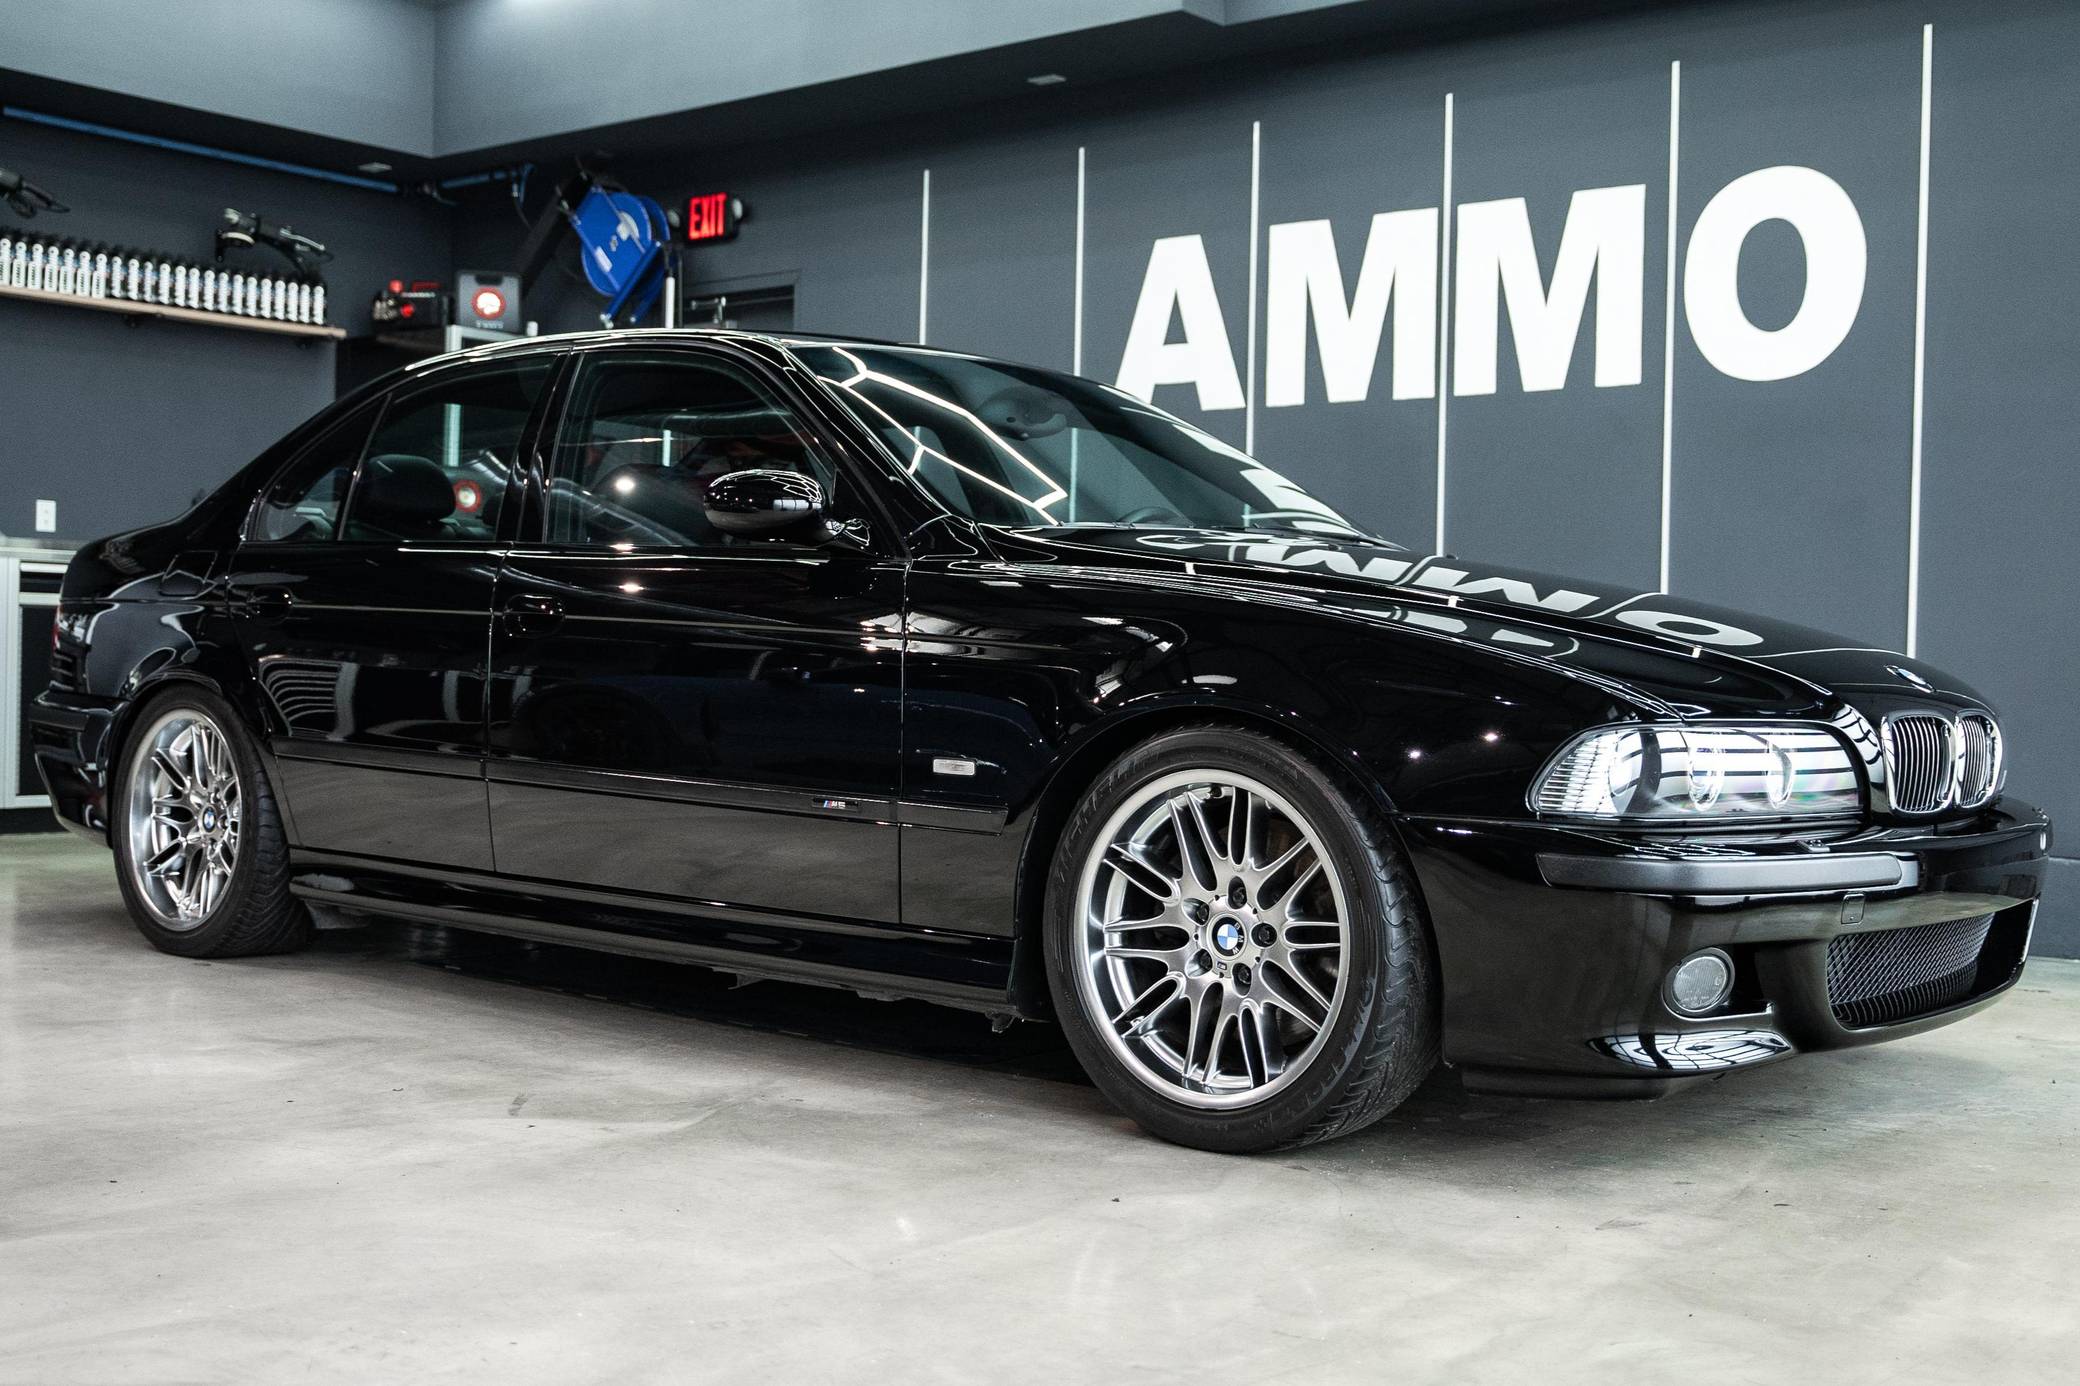 Here's a complete history of the BMW M5